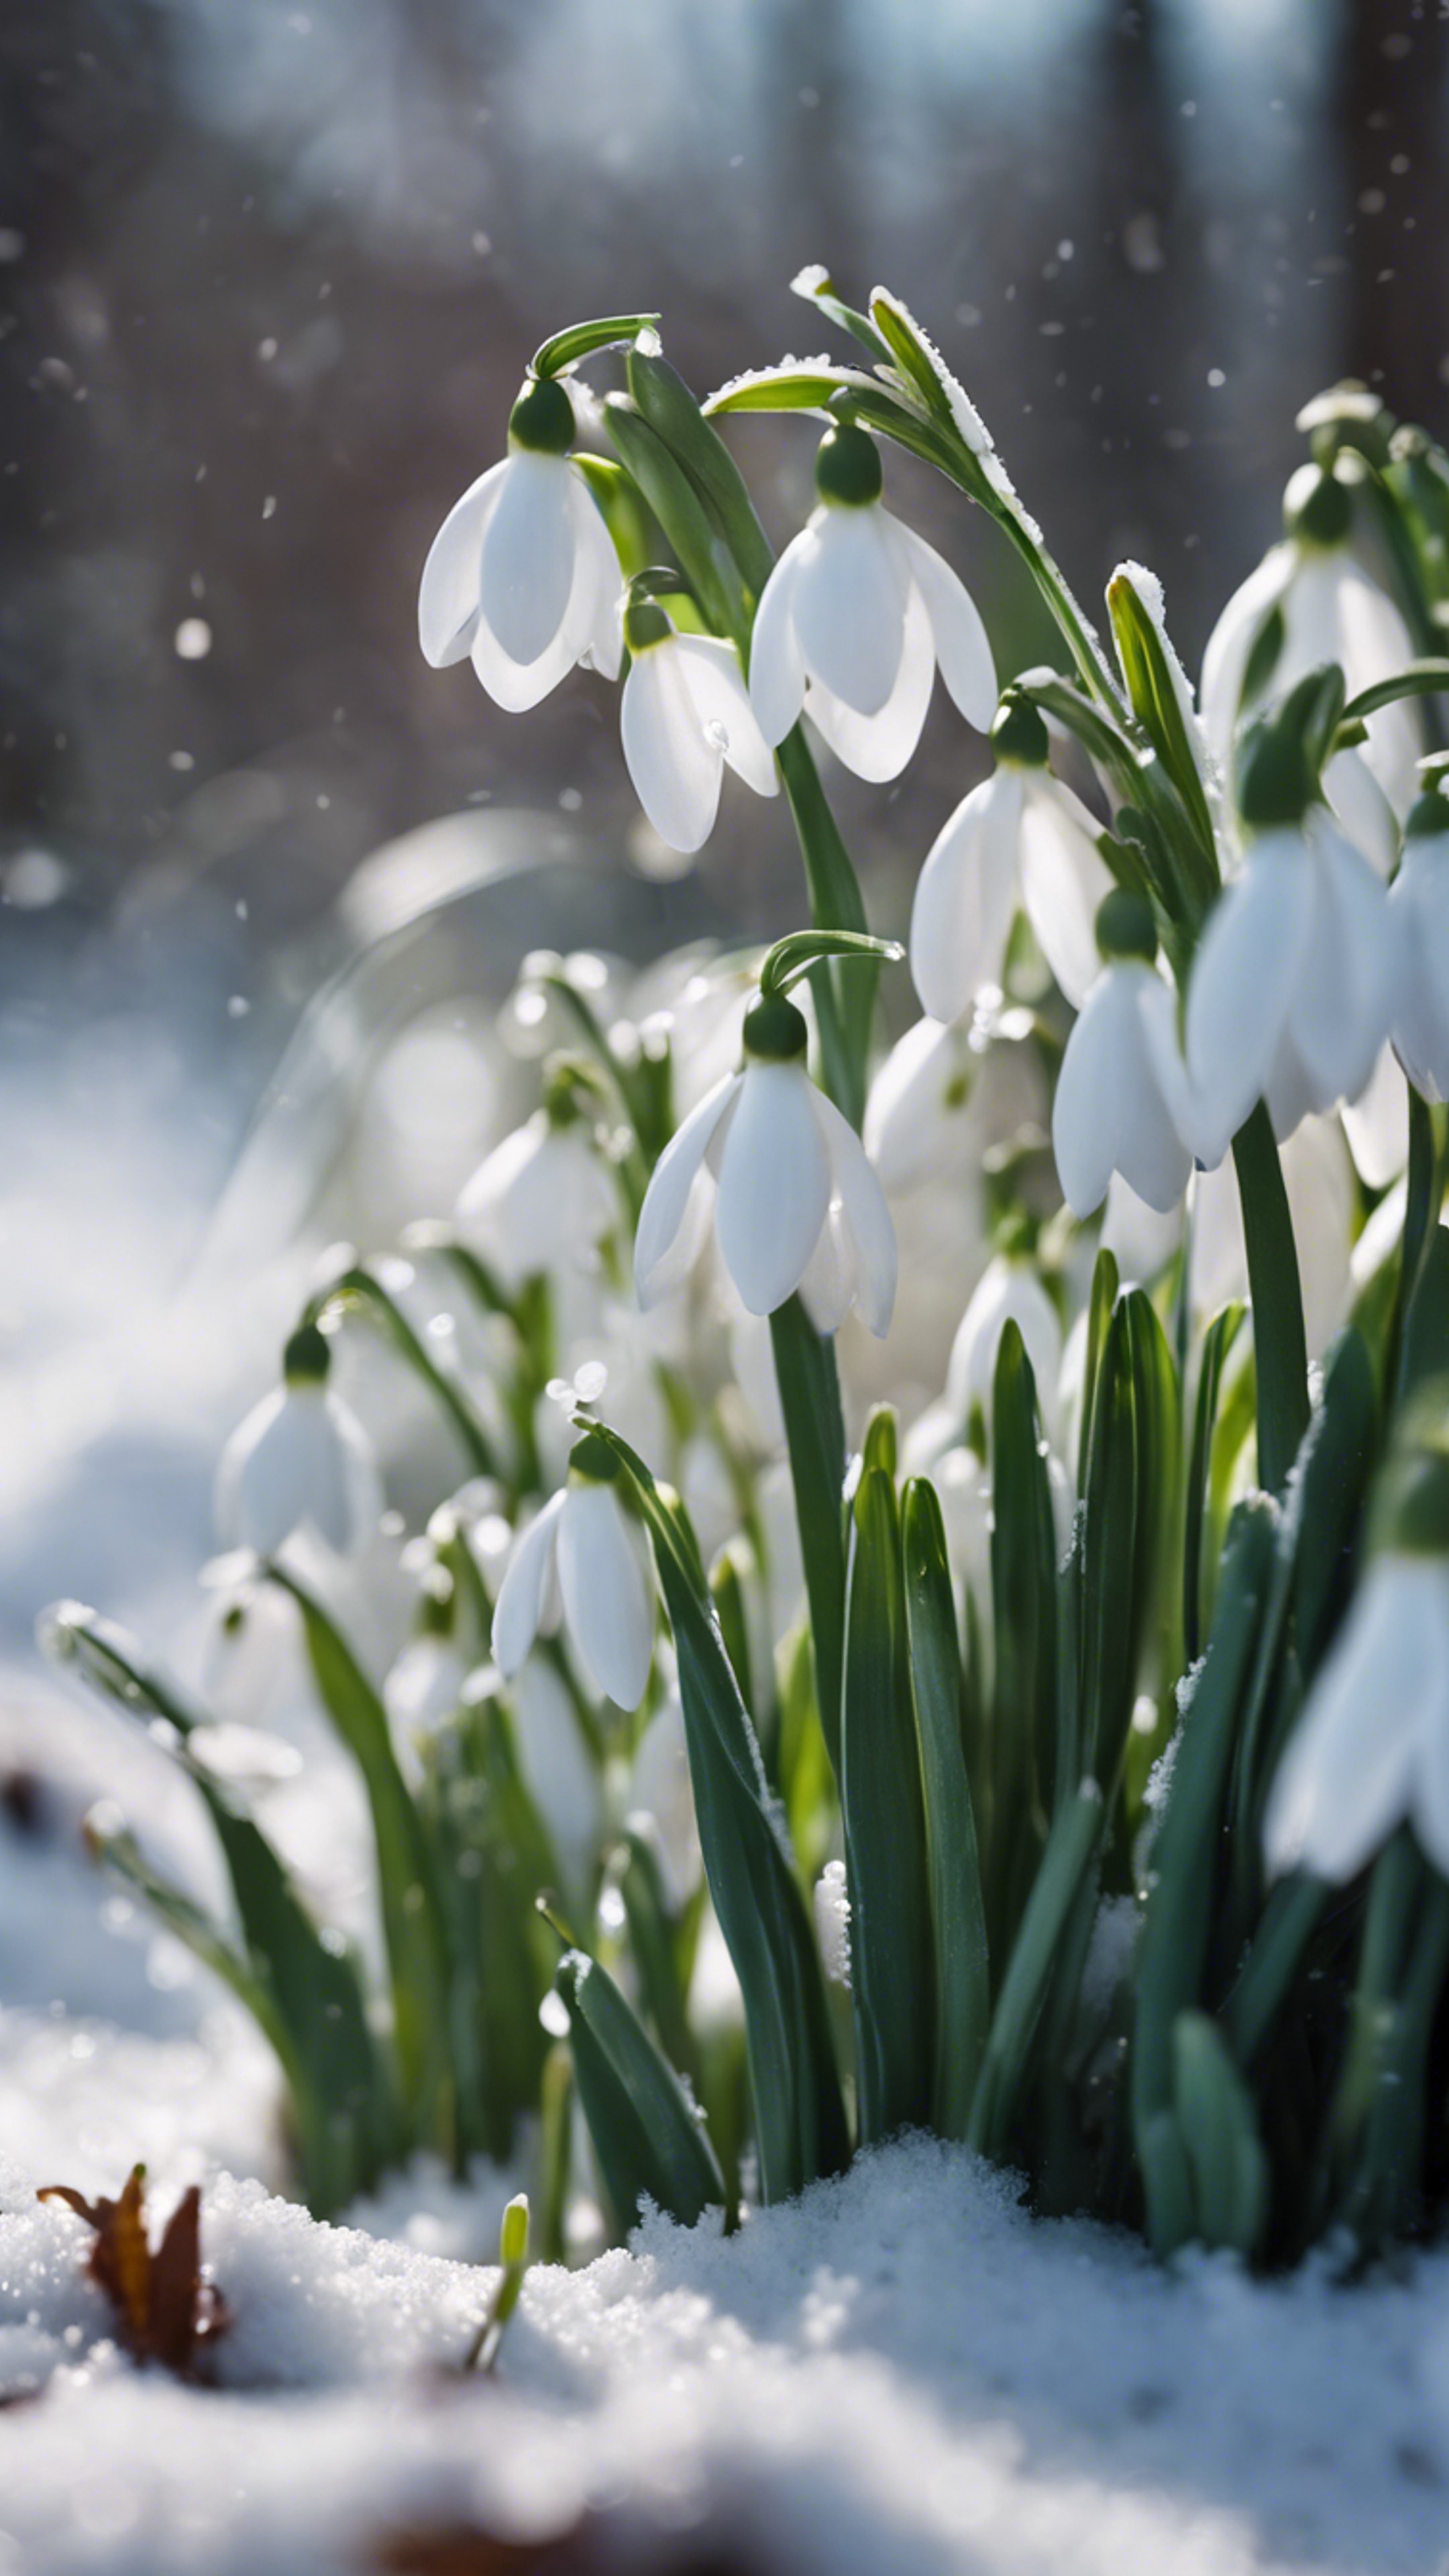 A patch of white snowdrops peeking through a dusting of late spring snow. Валлпапер[e64c535efd0a459c9840]